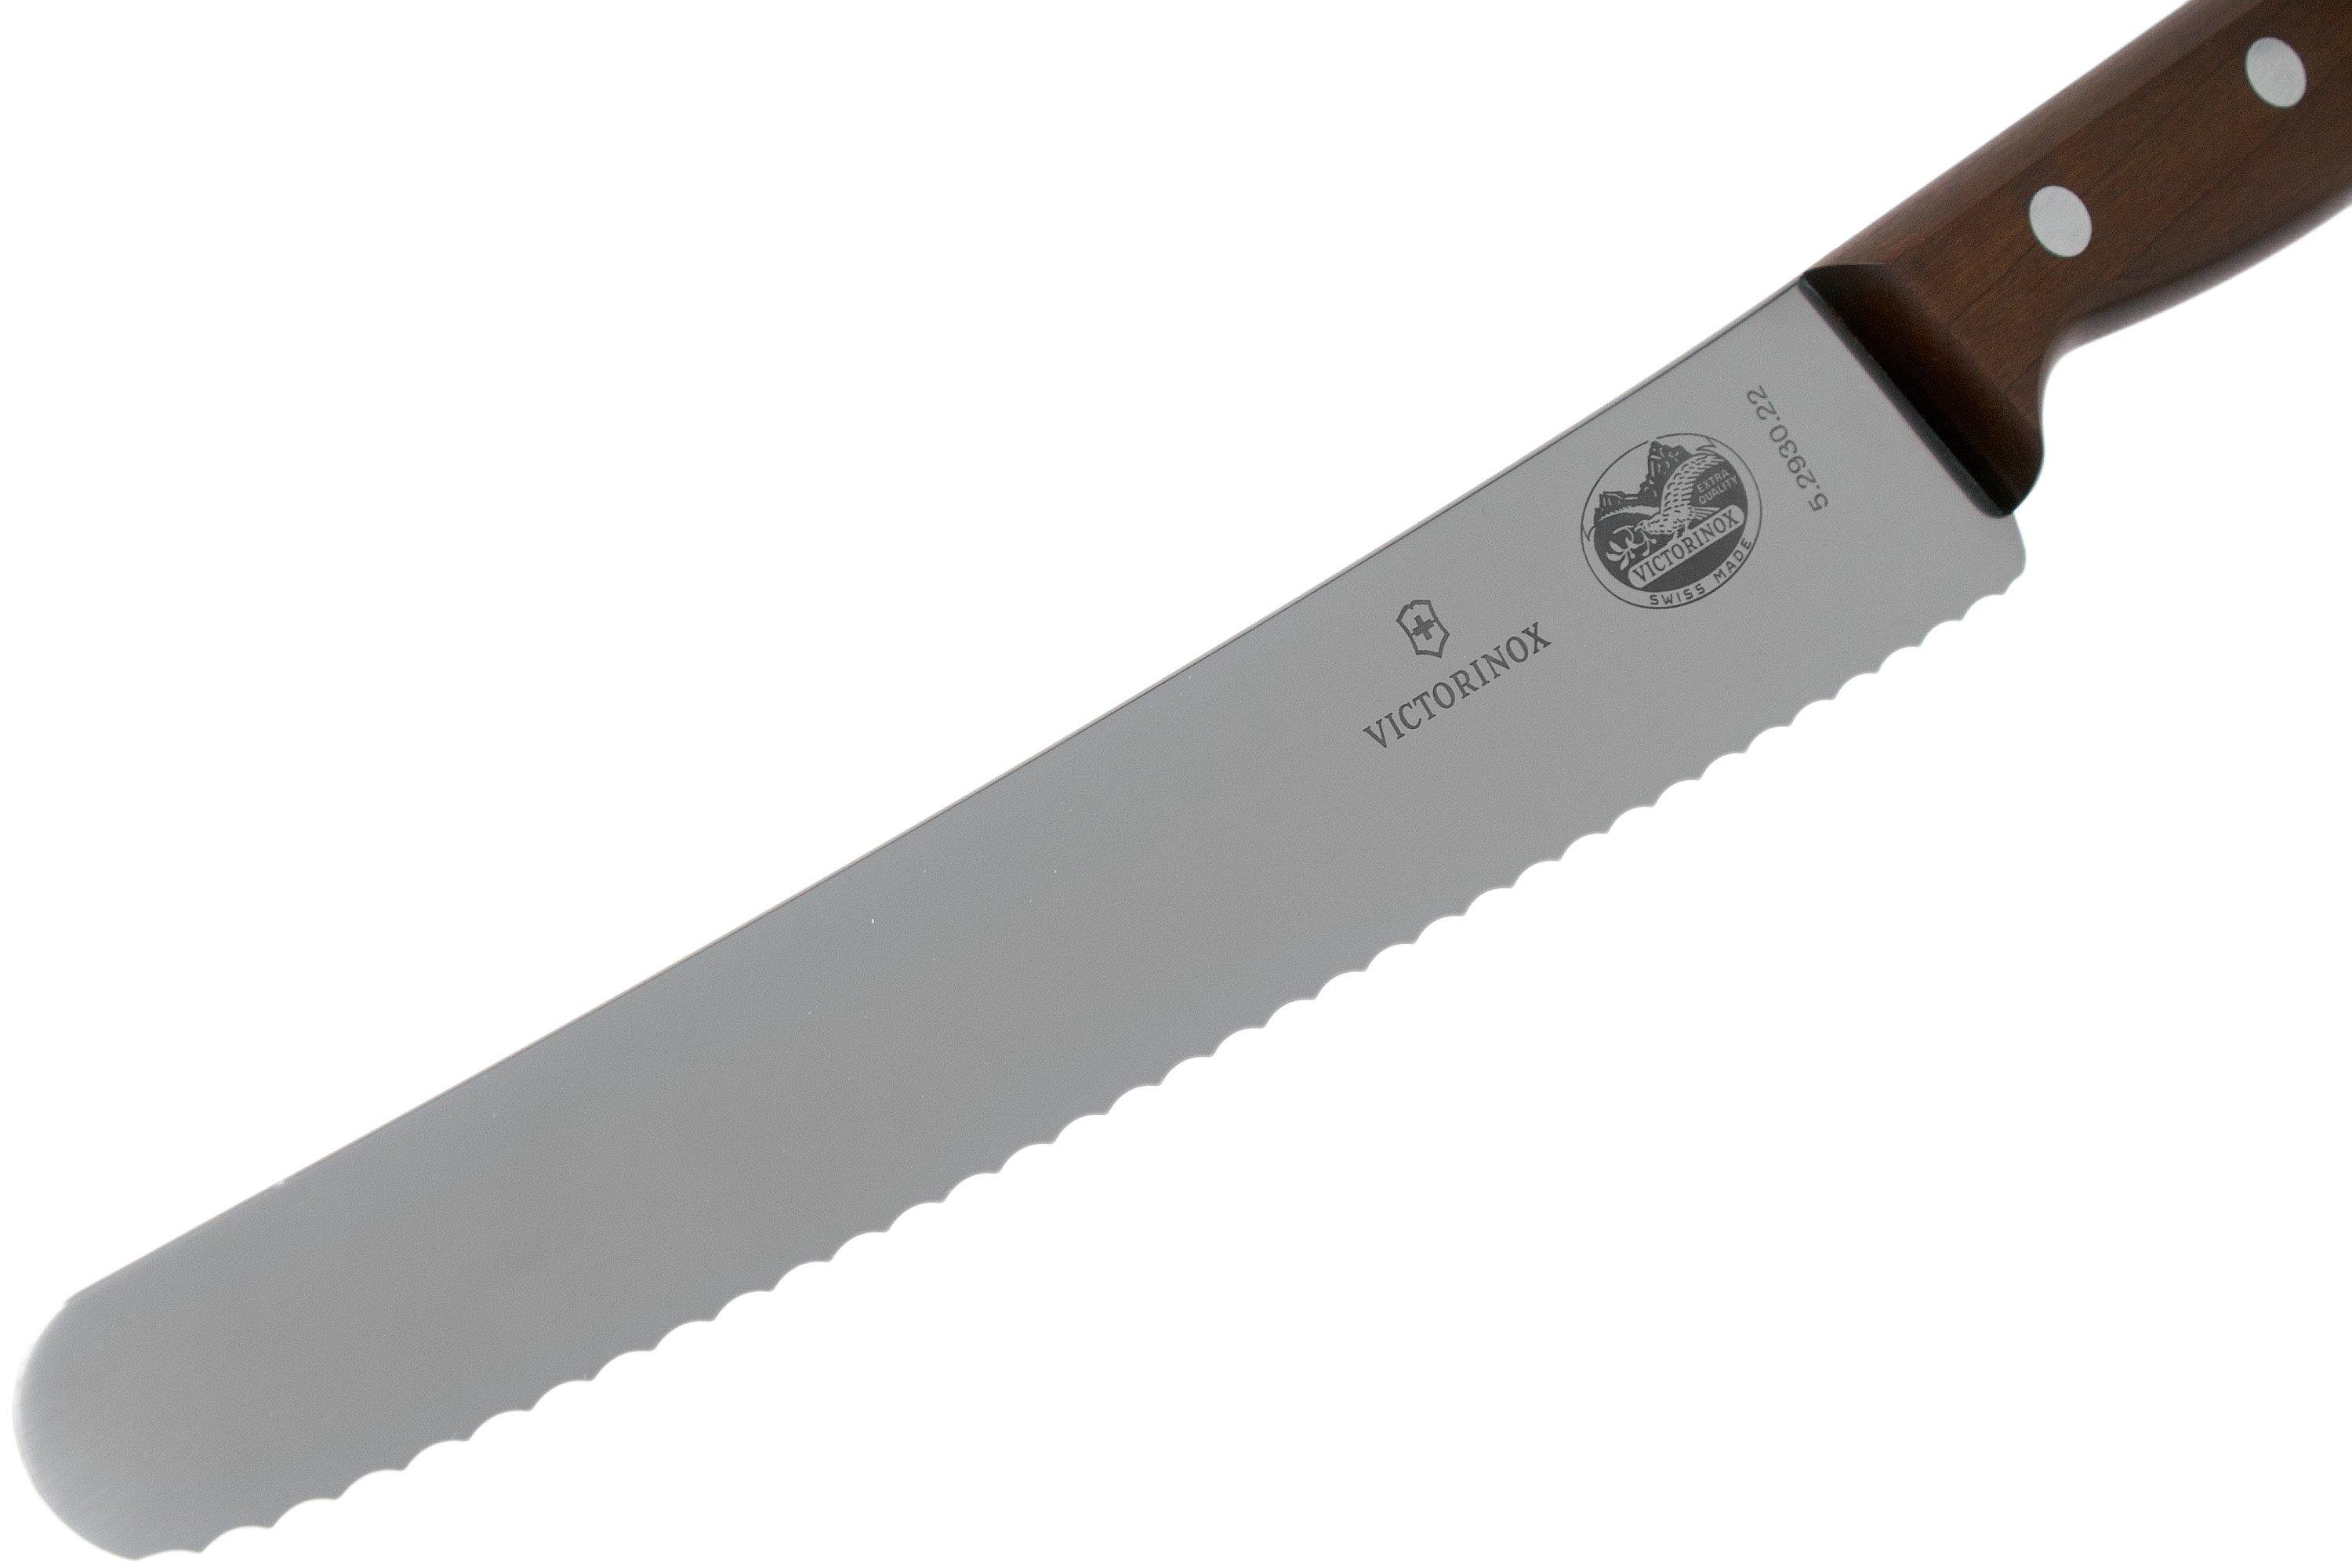 Series 2900 Pastry Knife, 30cm